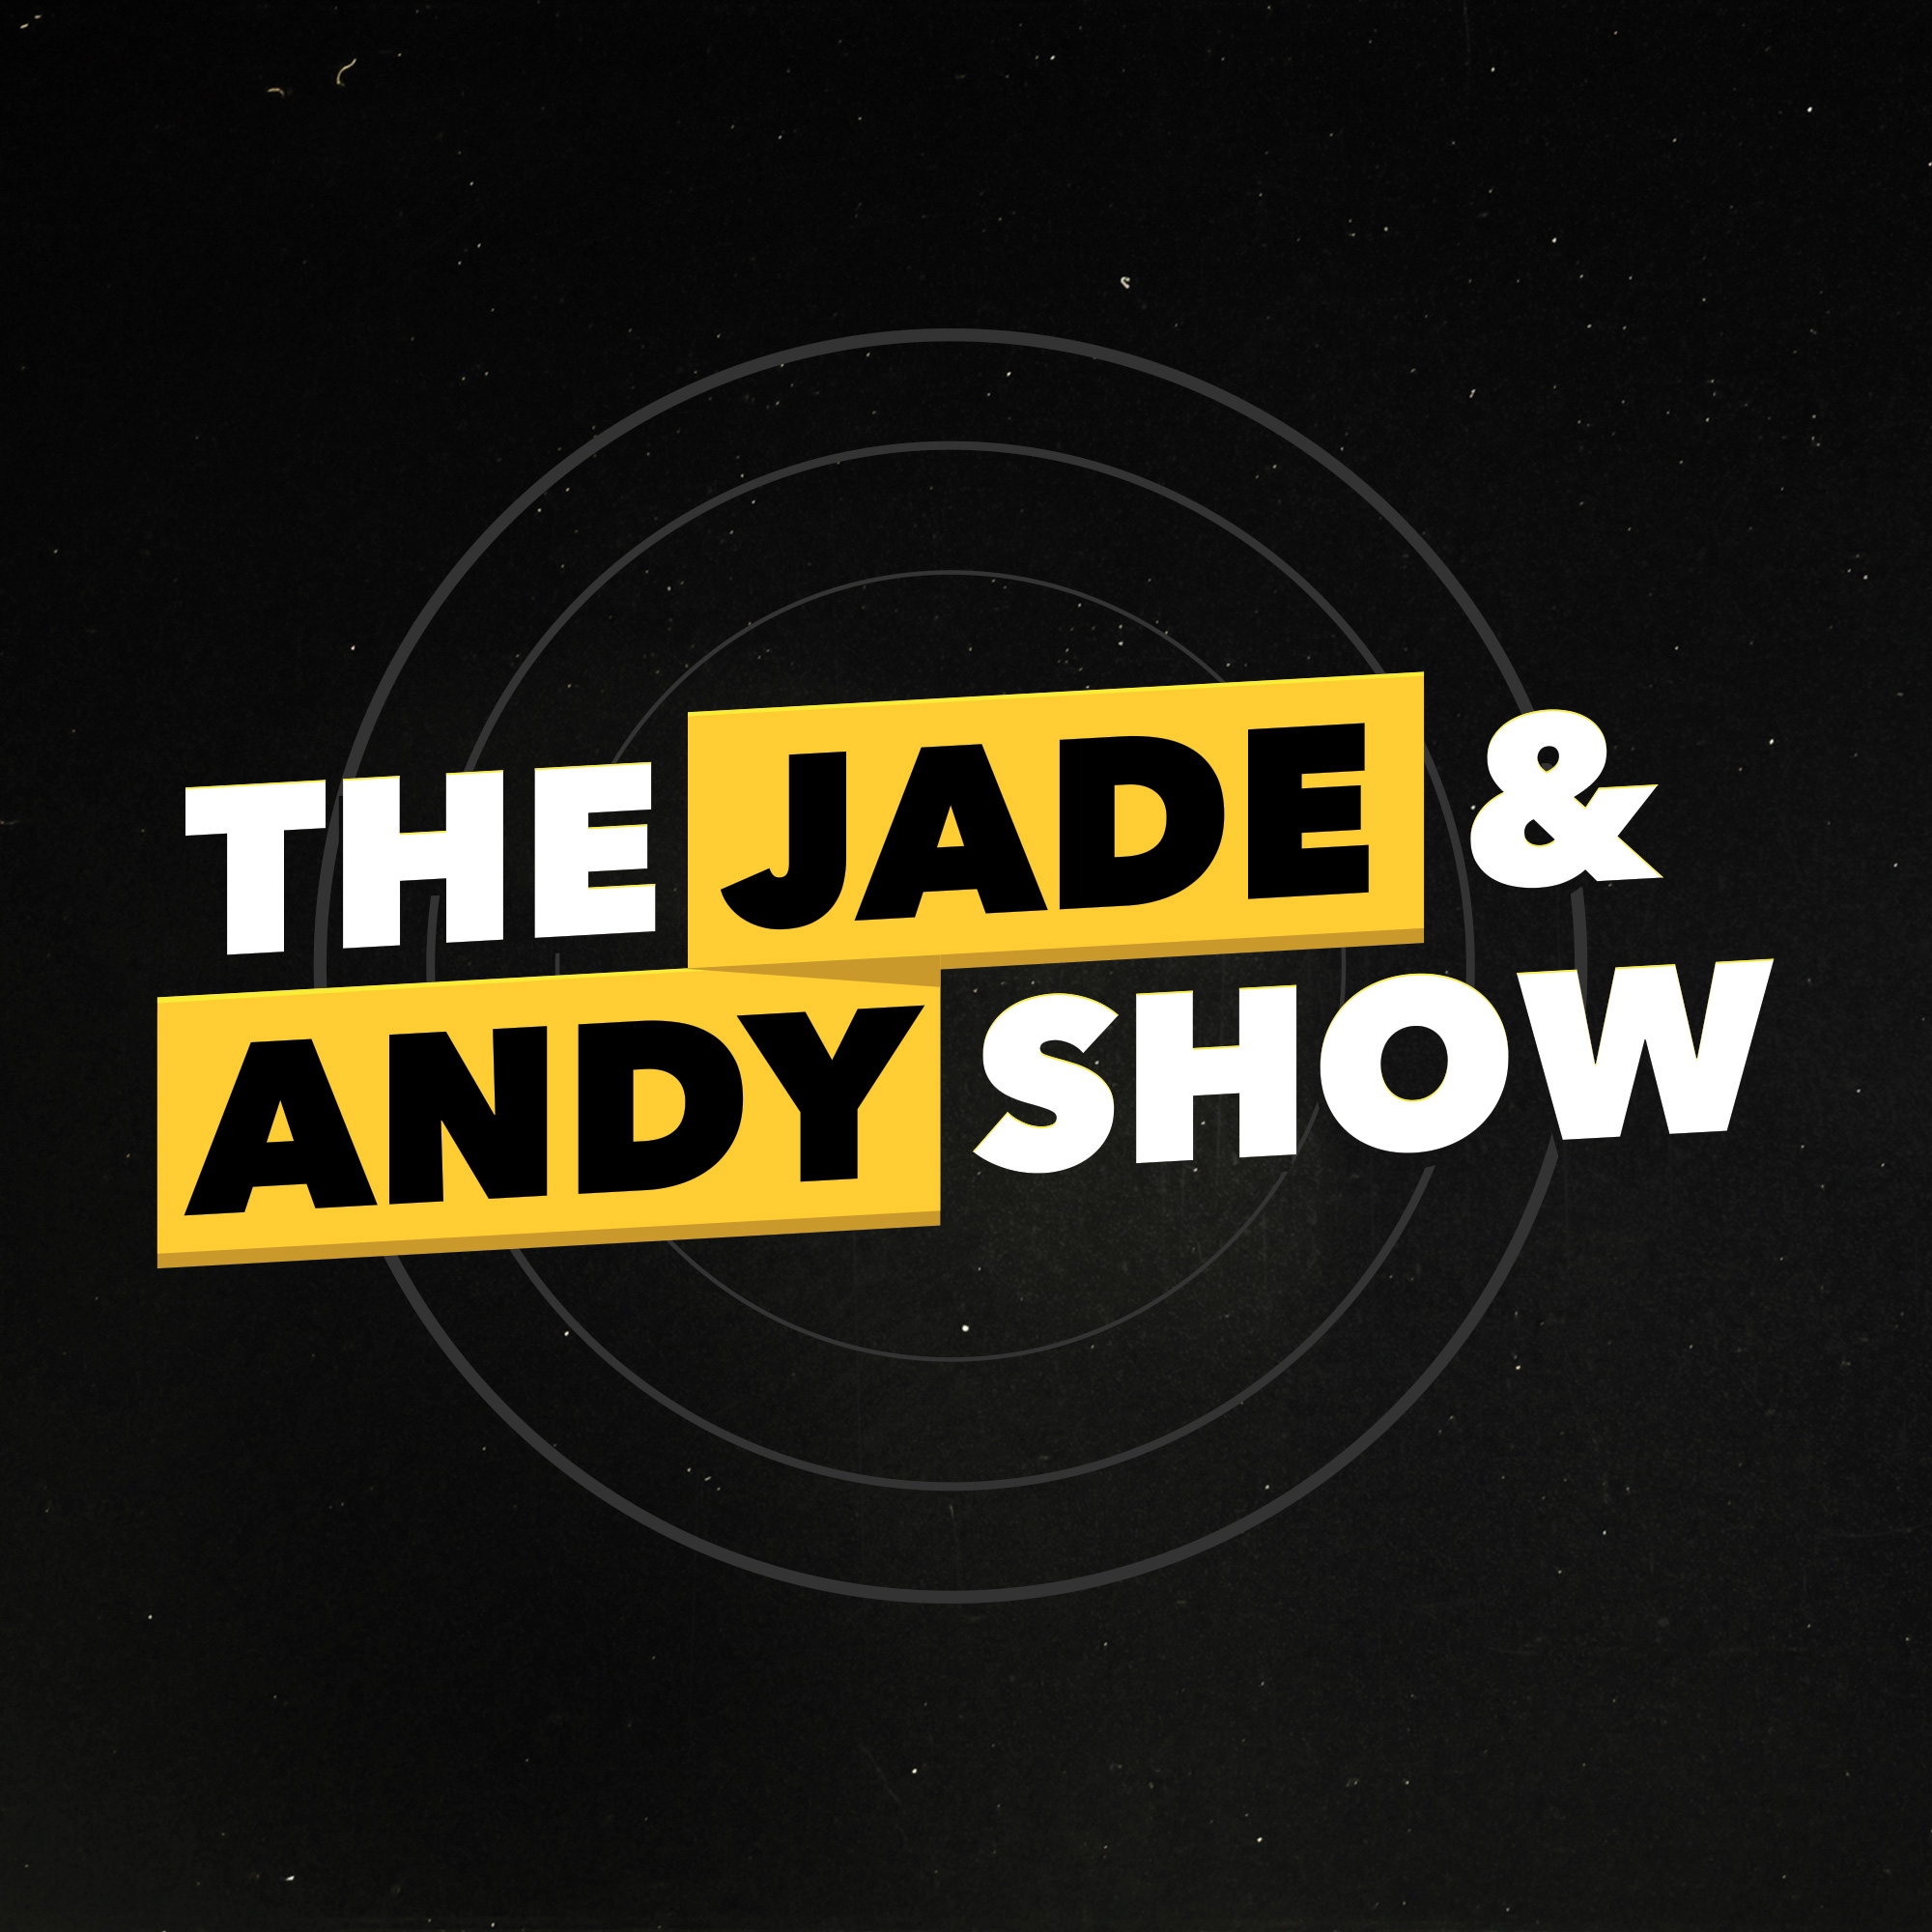 The Jade & Andy Show - Kite Flying Weekend